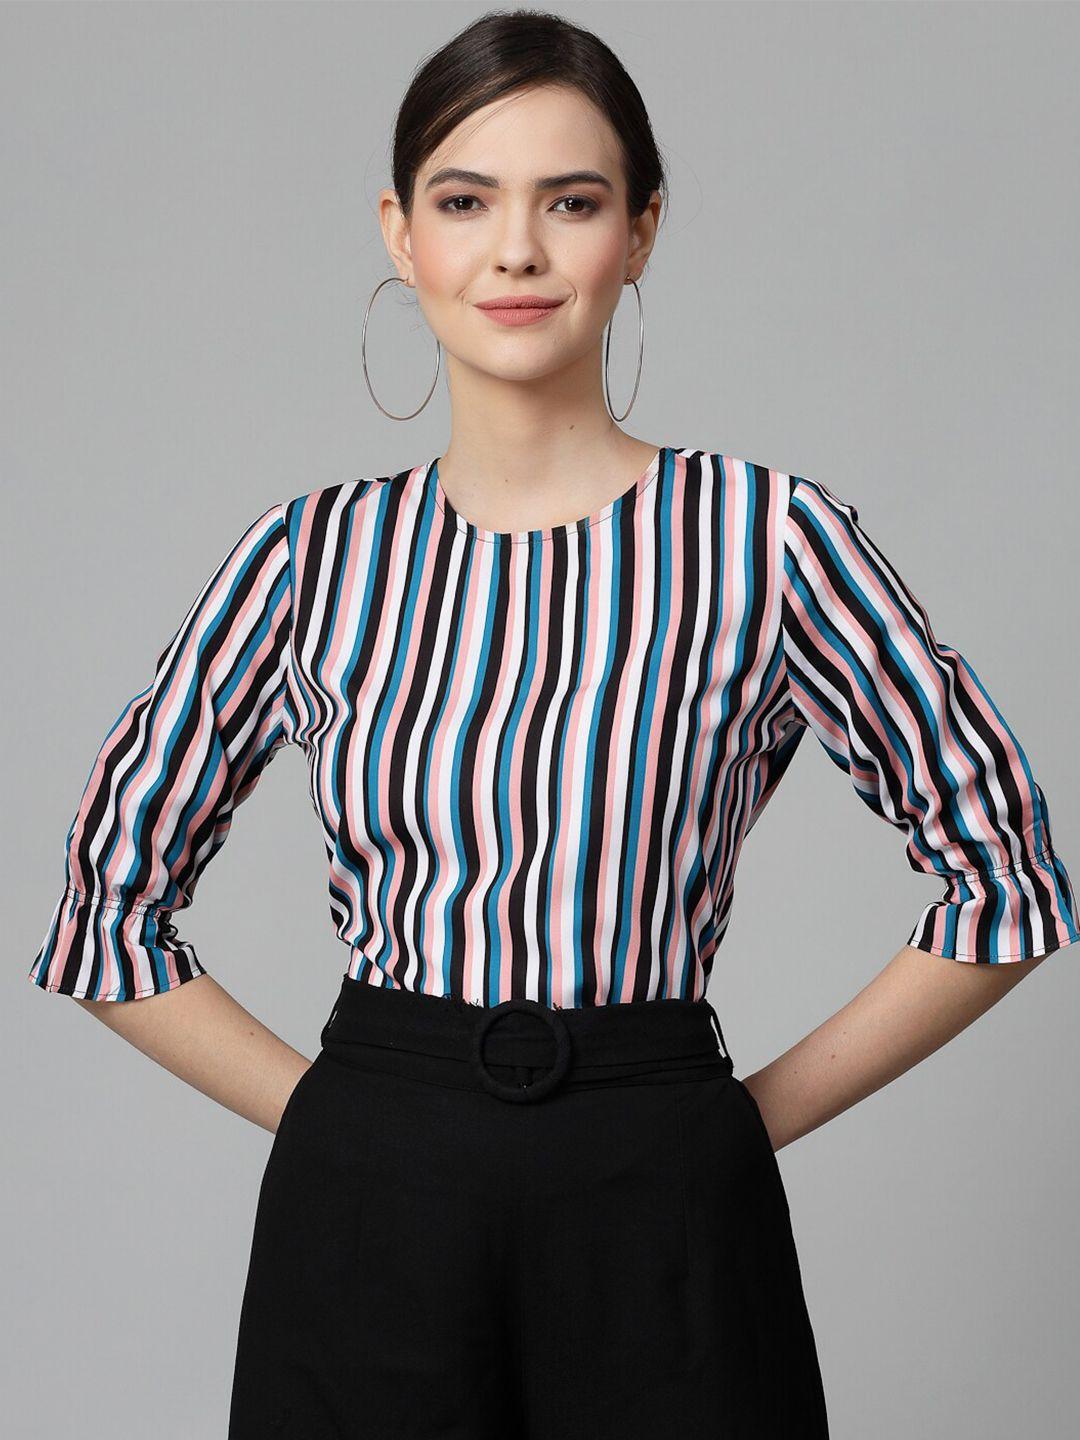 style-quotient-pink-&-black-striped-round-neck-top